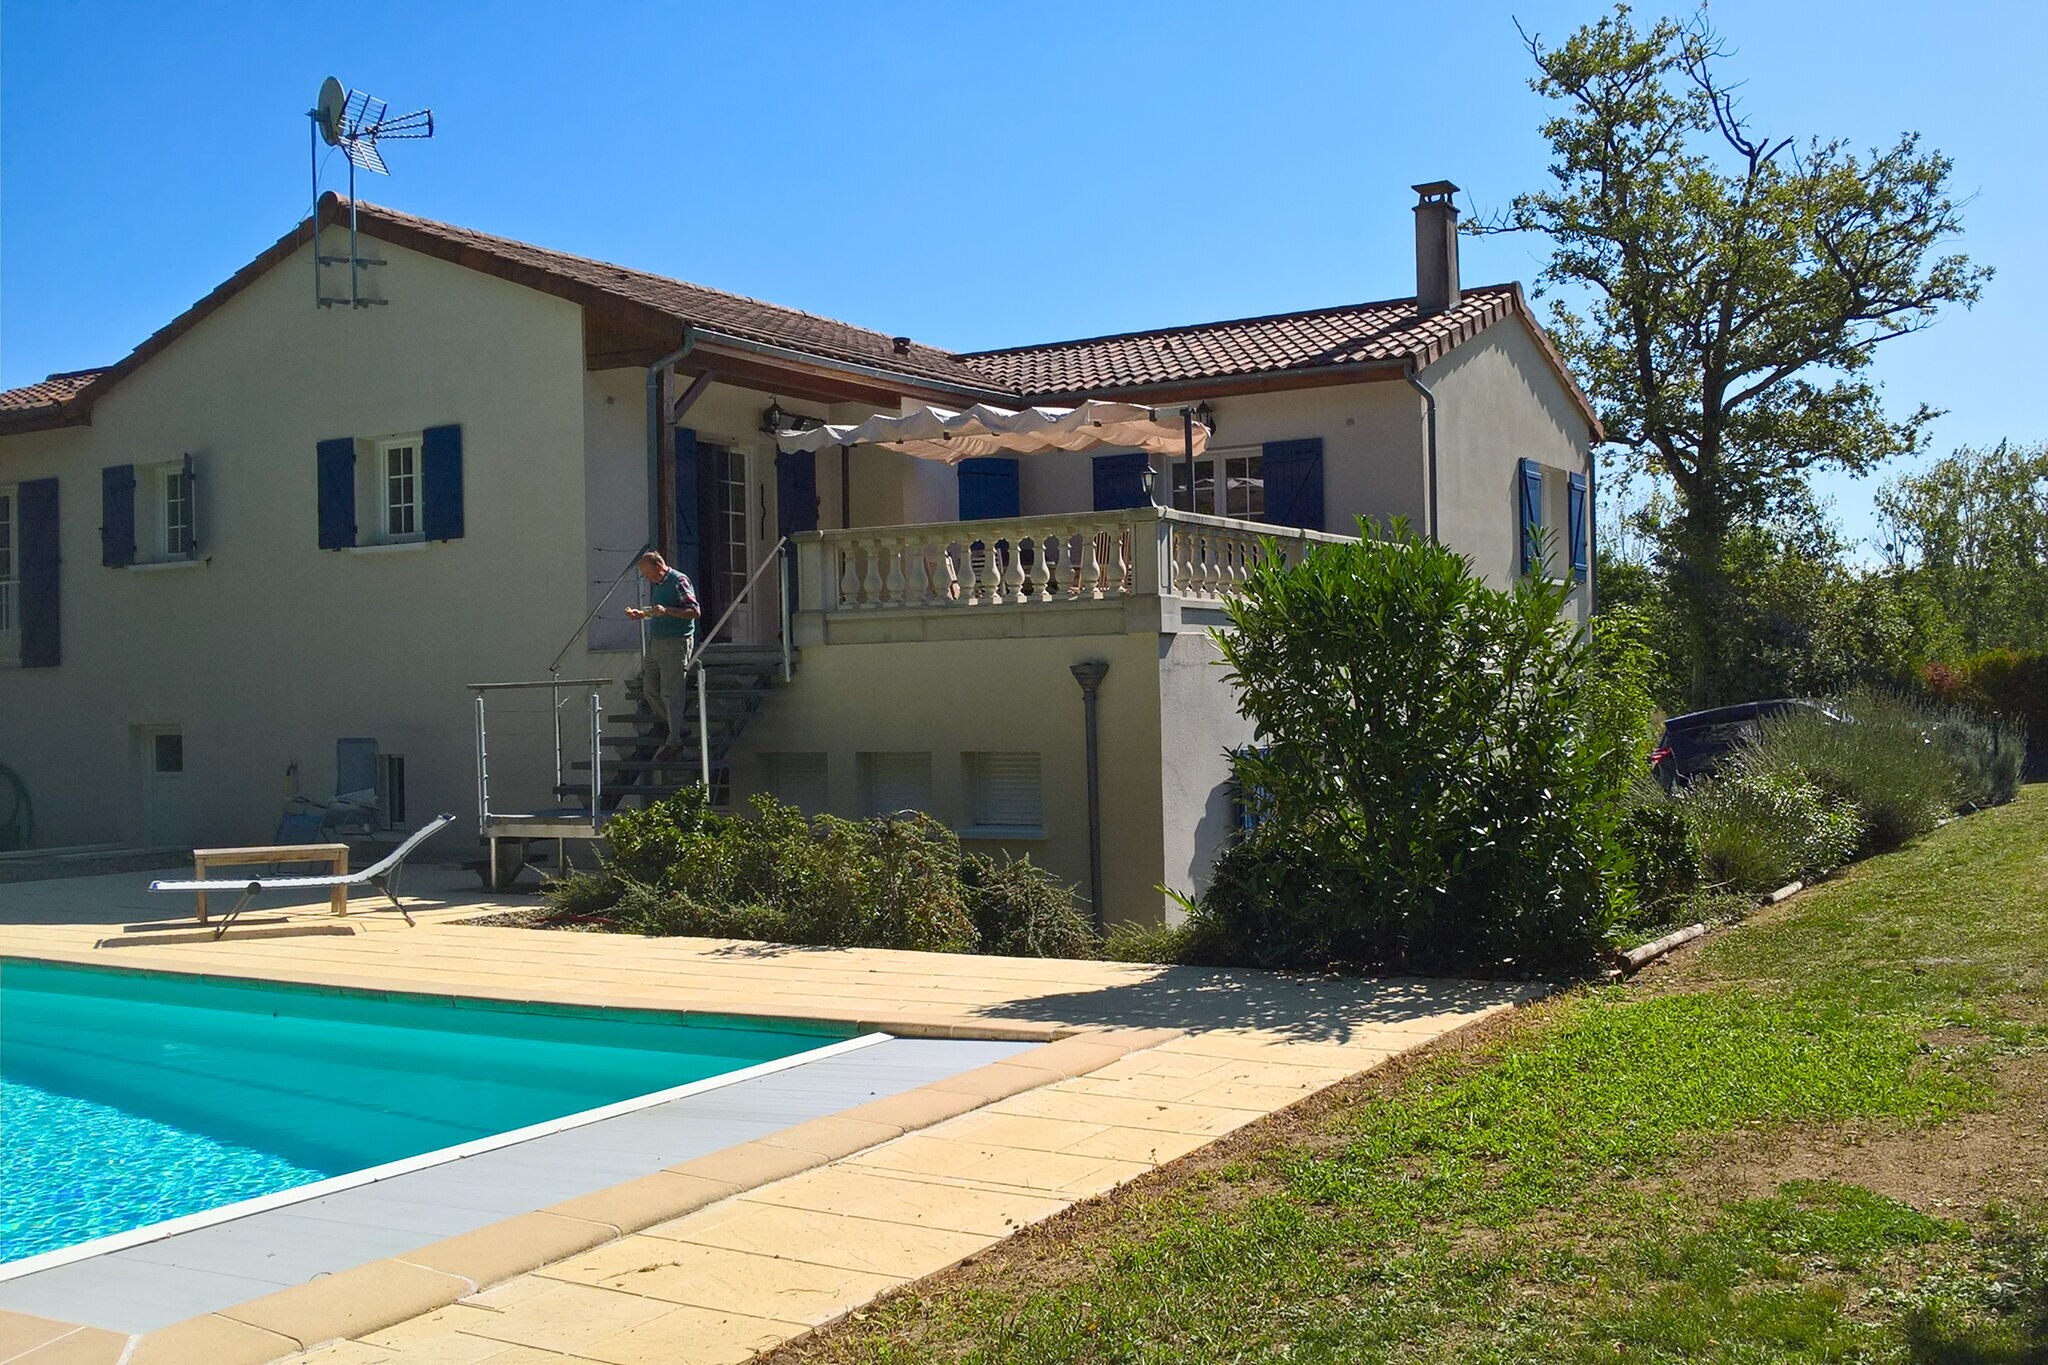 Detached villa with large garden near beautiful golf course